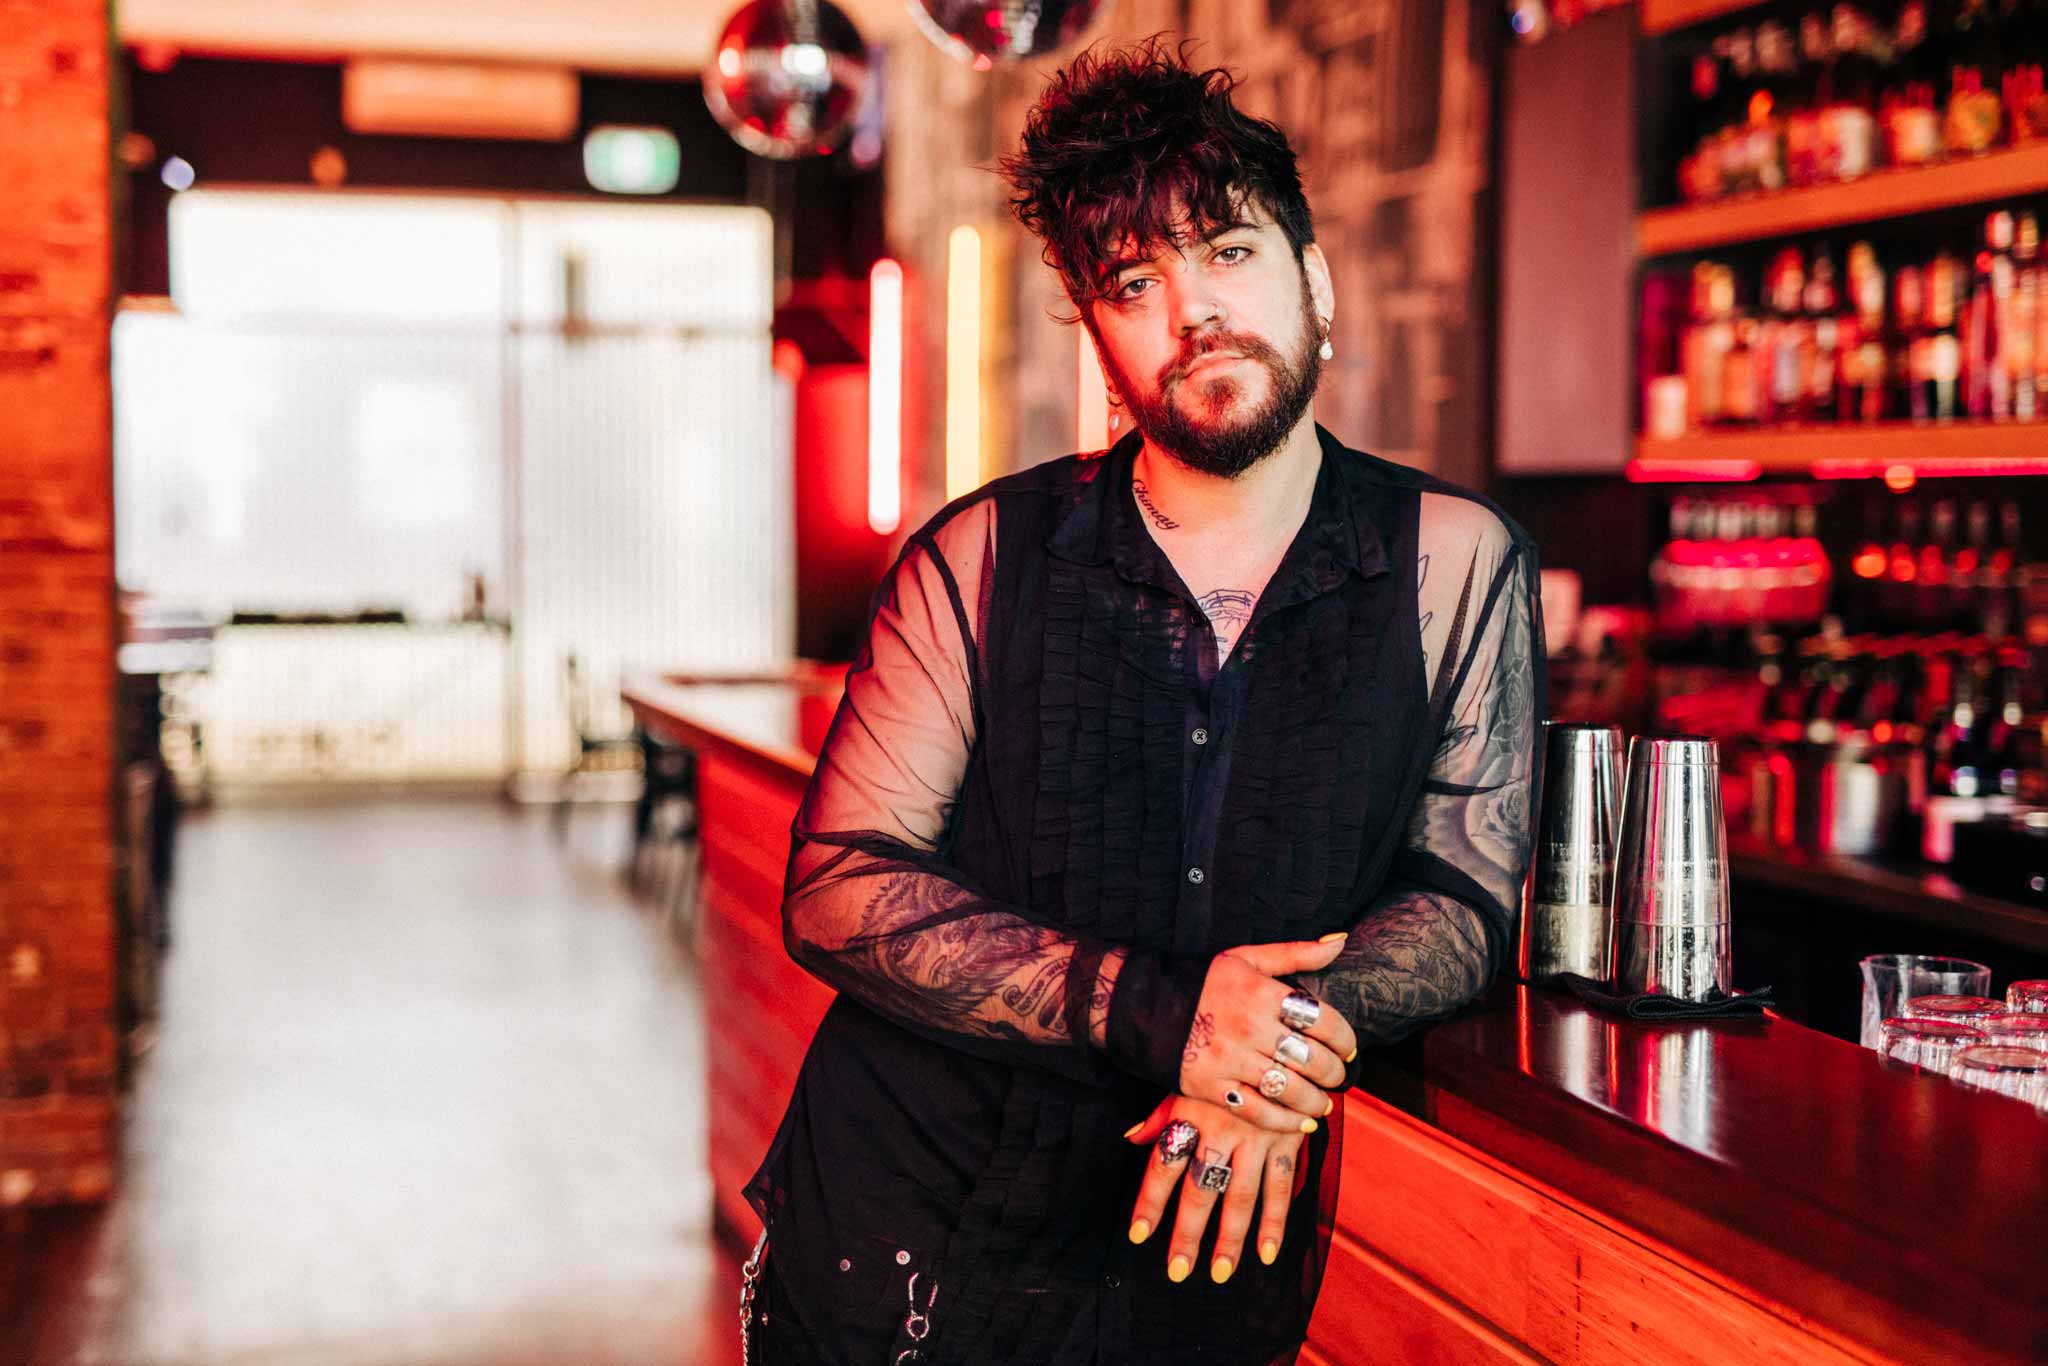 Kyle Weir on raising money for bartenders, and how he opened 3 bars in a year